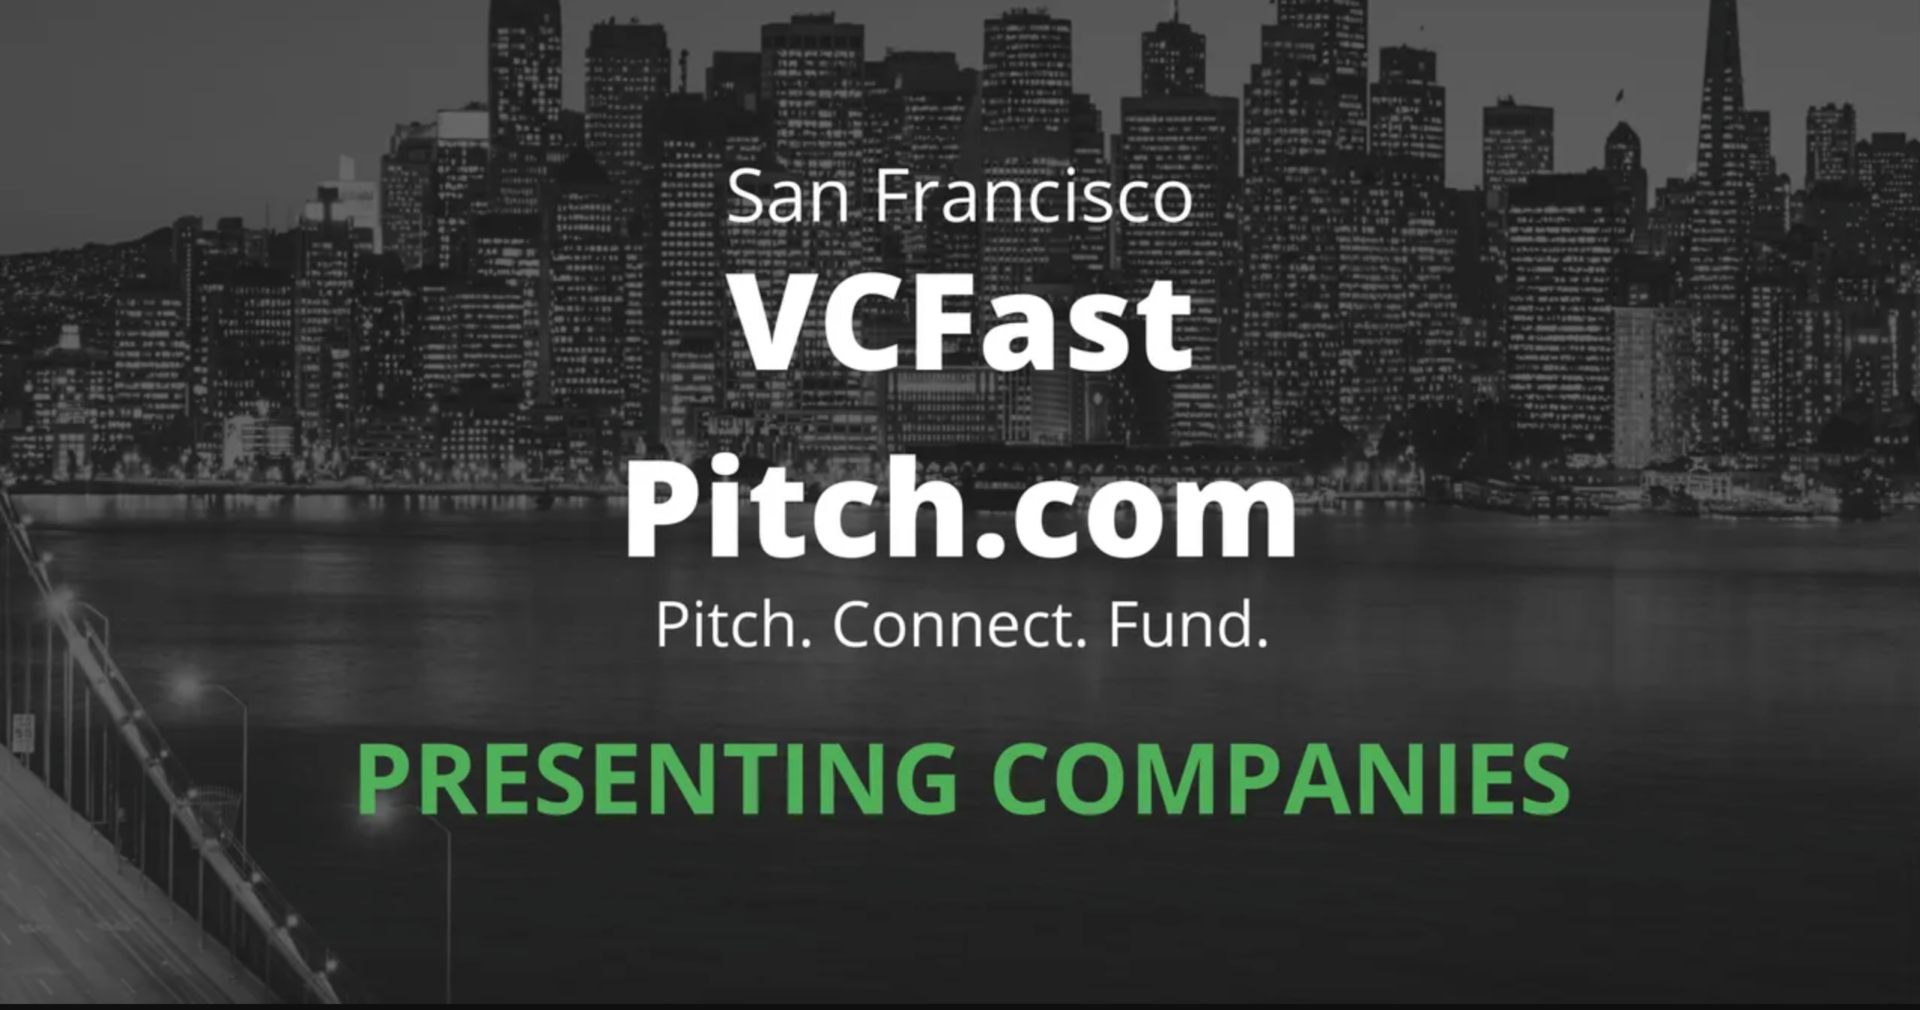 VC Fast Pitch Presenting Companies for April 8, 2021 Event